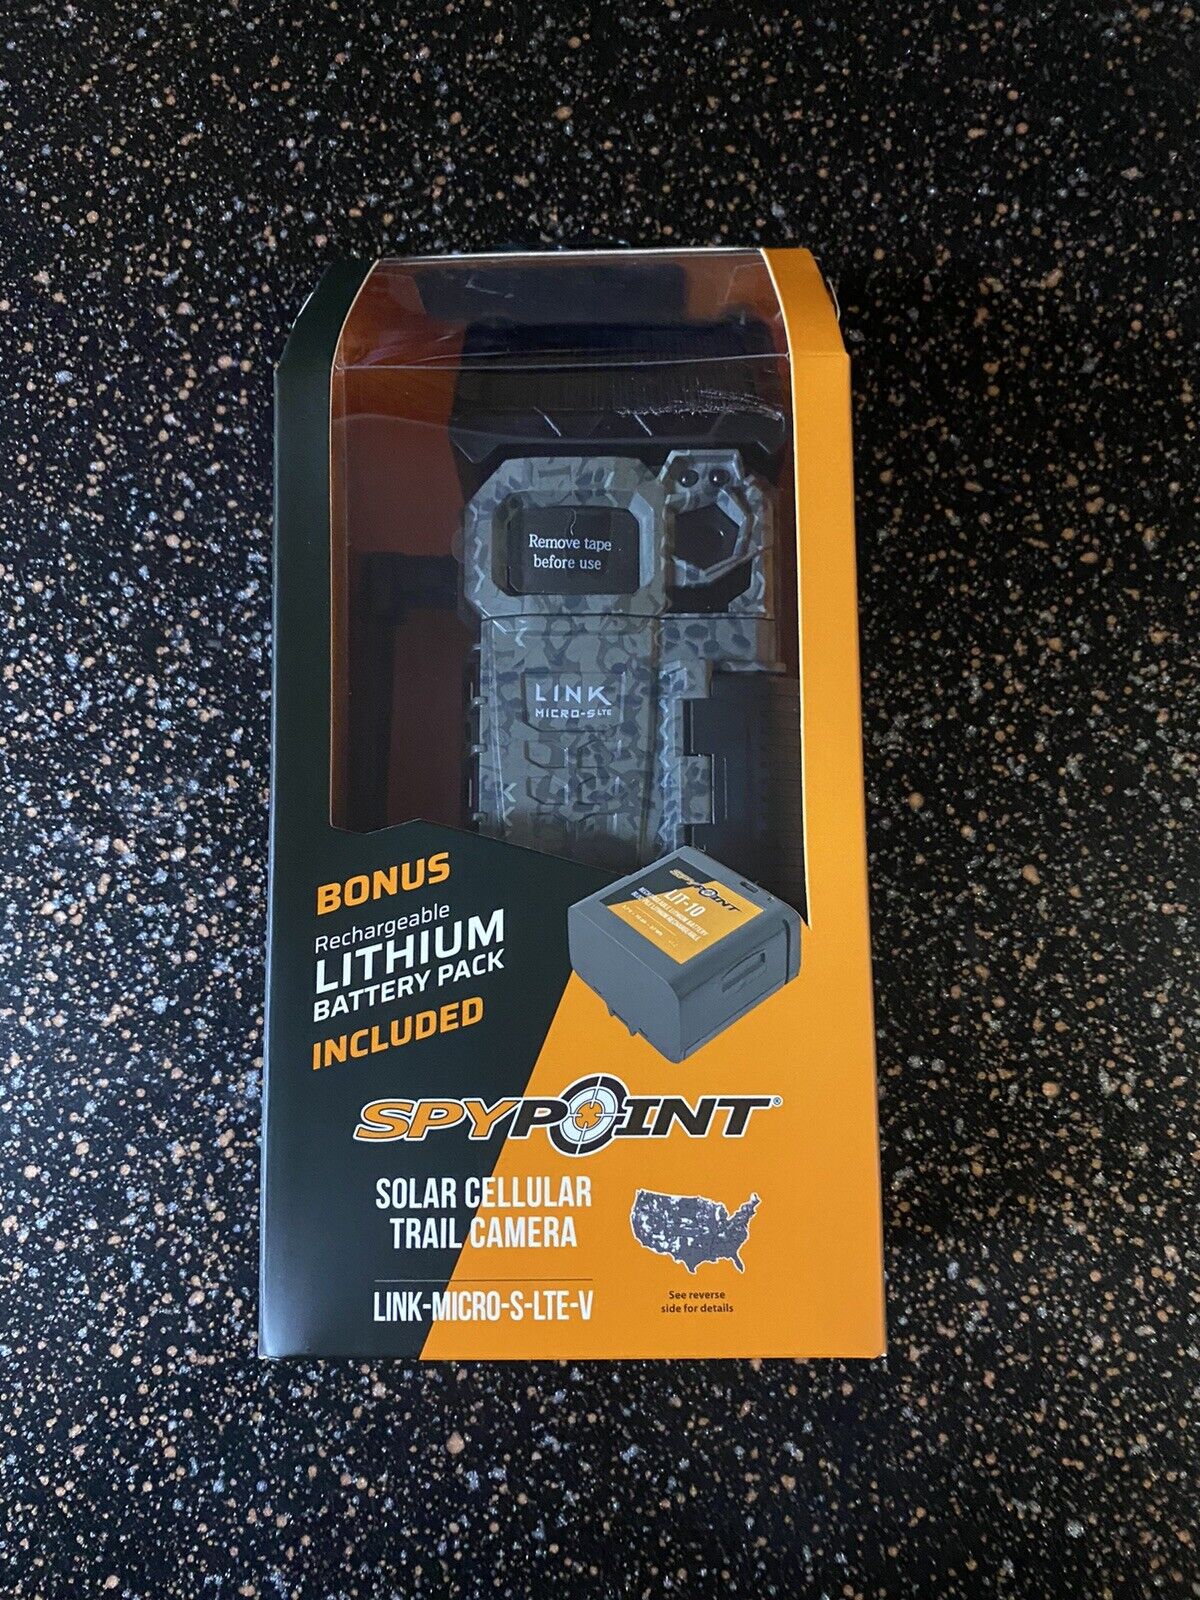 SPYPOINT 2020 LINK-MICRO-S-LTE-V Cellular Trail Camera